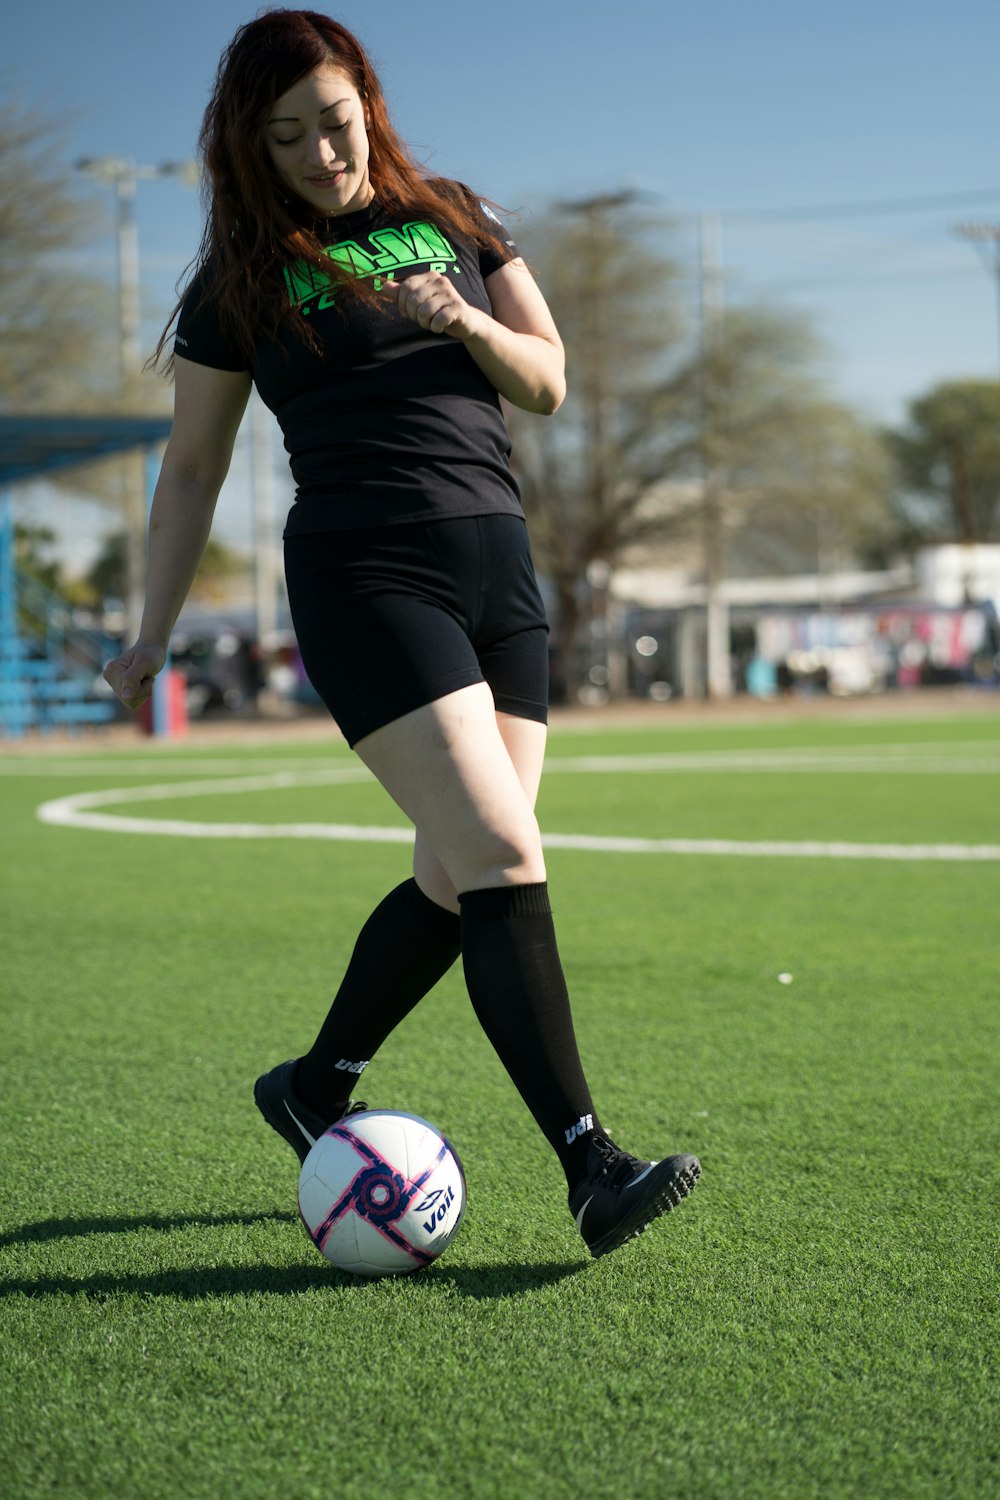 woman in black and green shirt and black shorts playing soccer during daytime